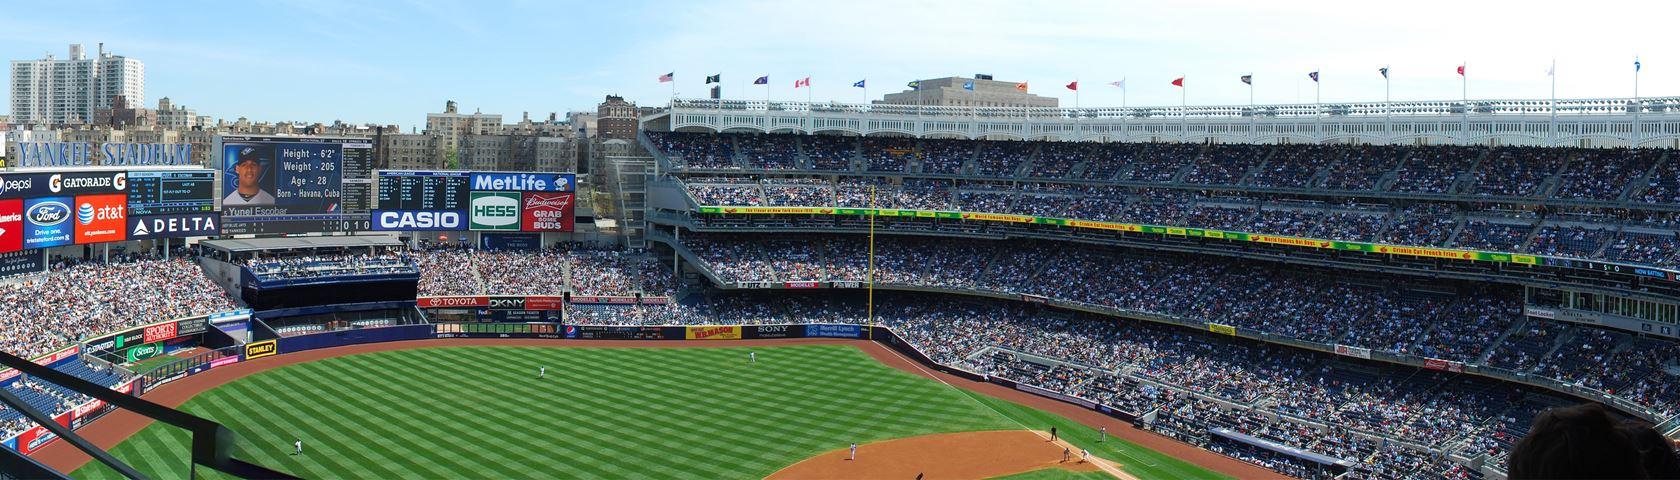 Yankee Stadium • Image • WallpaperFusion by Binary Fortress Software